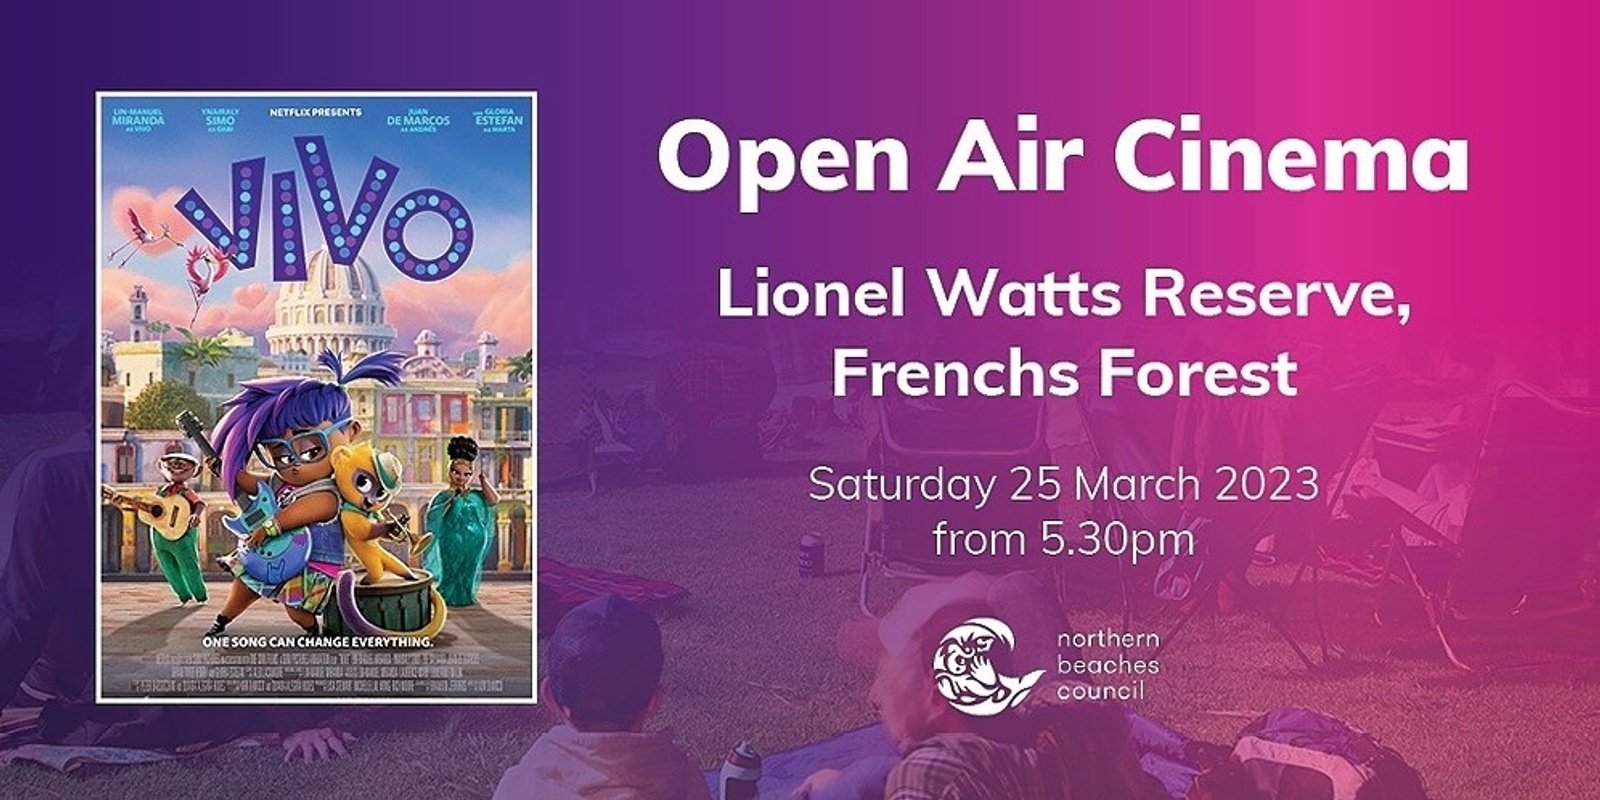 Open Air Cinema, Frenchs Forest - Saturday 25 March 2023 - Vivo